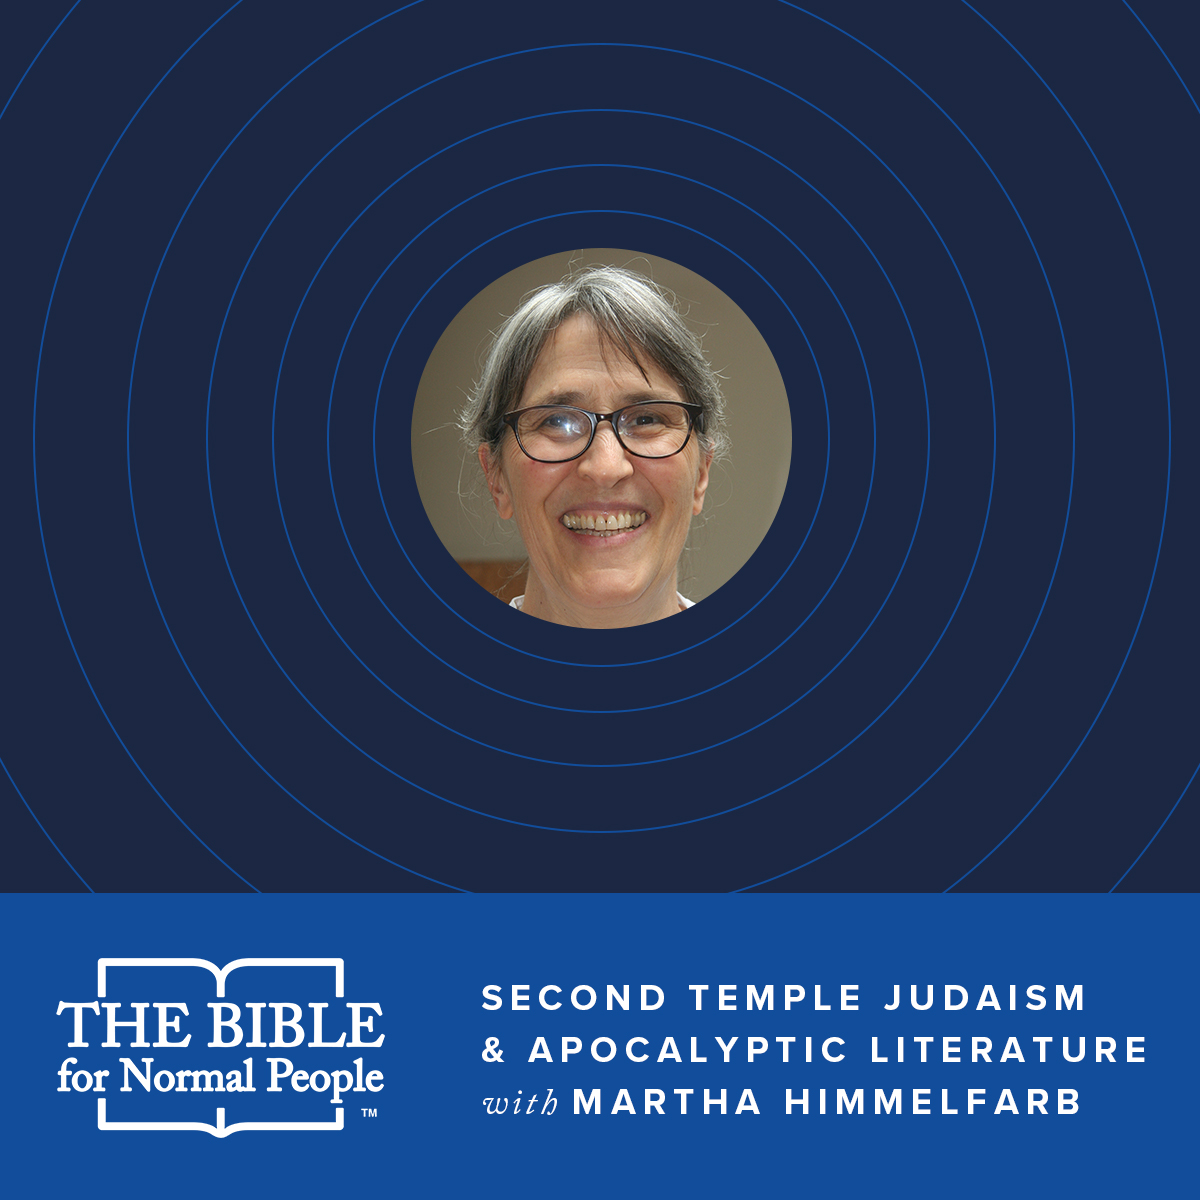 Interview with Martha Himmelfarb: Second Temple Judaism & Apocalyptic Literature